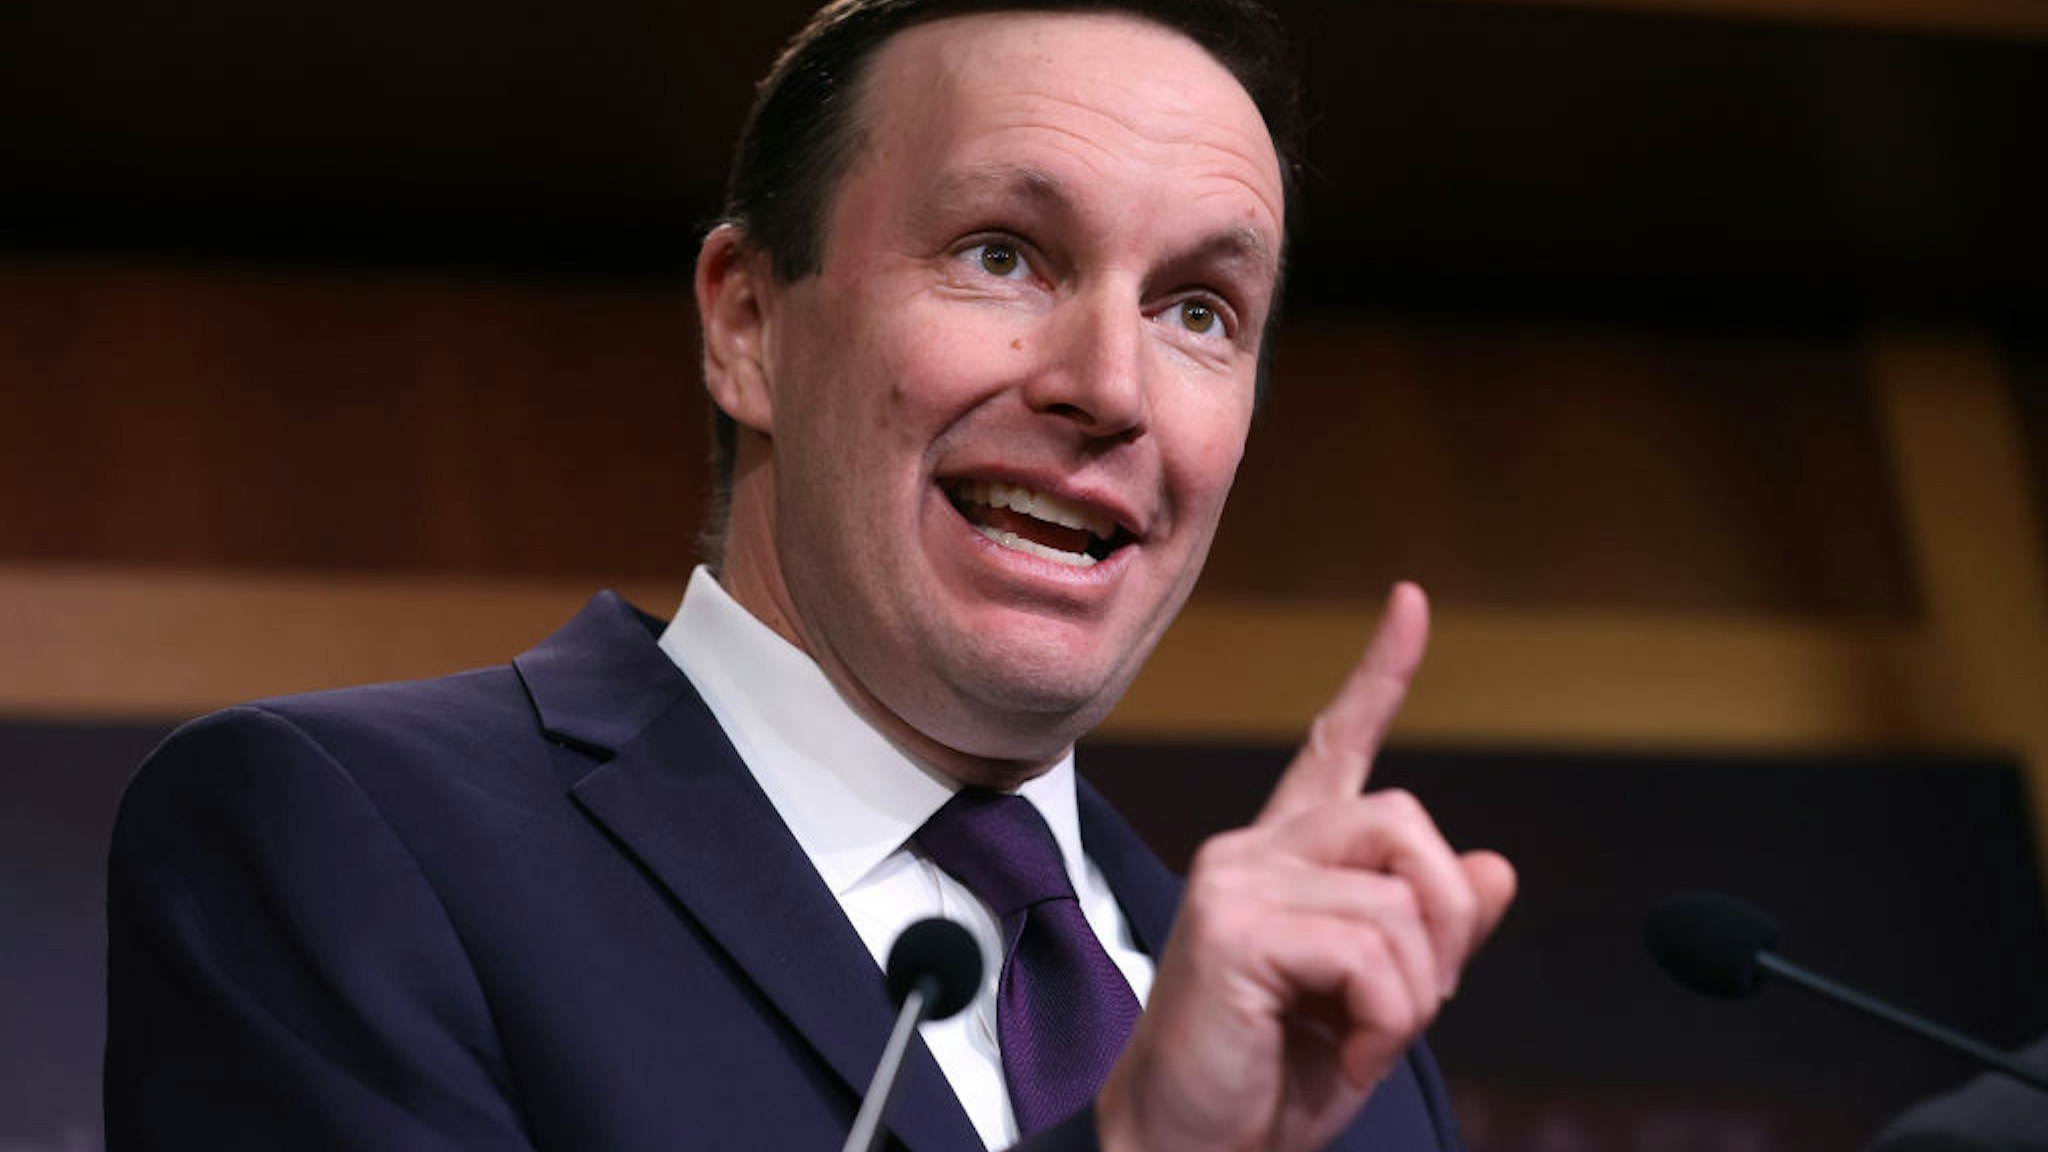 Sen. Chris Murphy (D-CT) speaks during a news conference at the U.S. Capitol January 22, 2020 in Washington, DC.